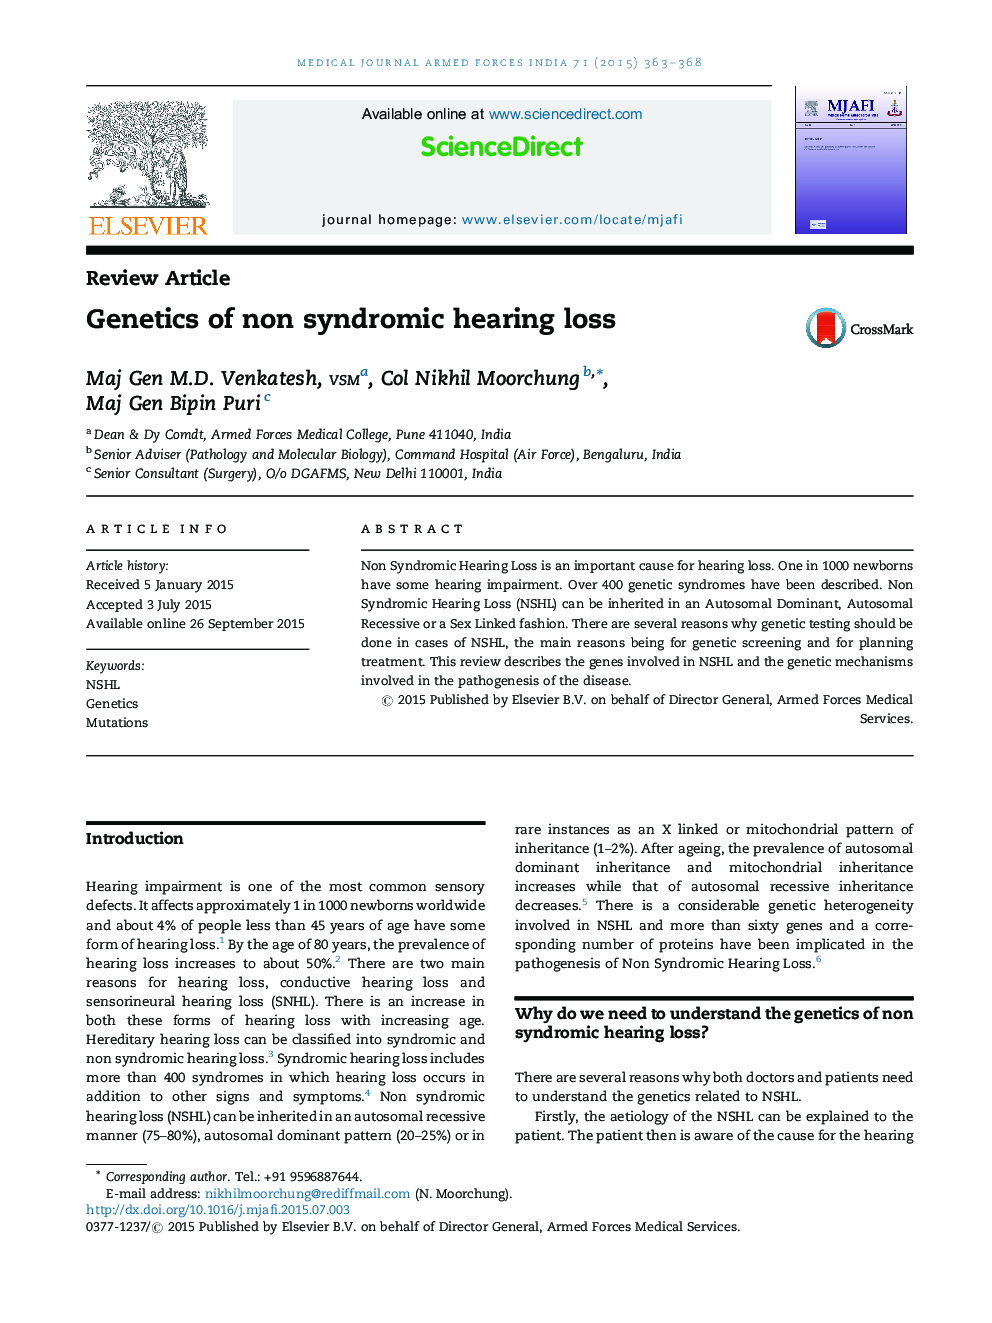 Genetics of non syndromic hearing loss